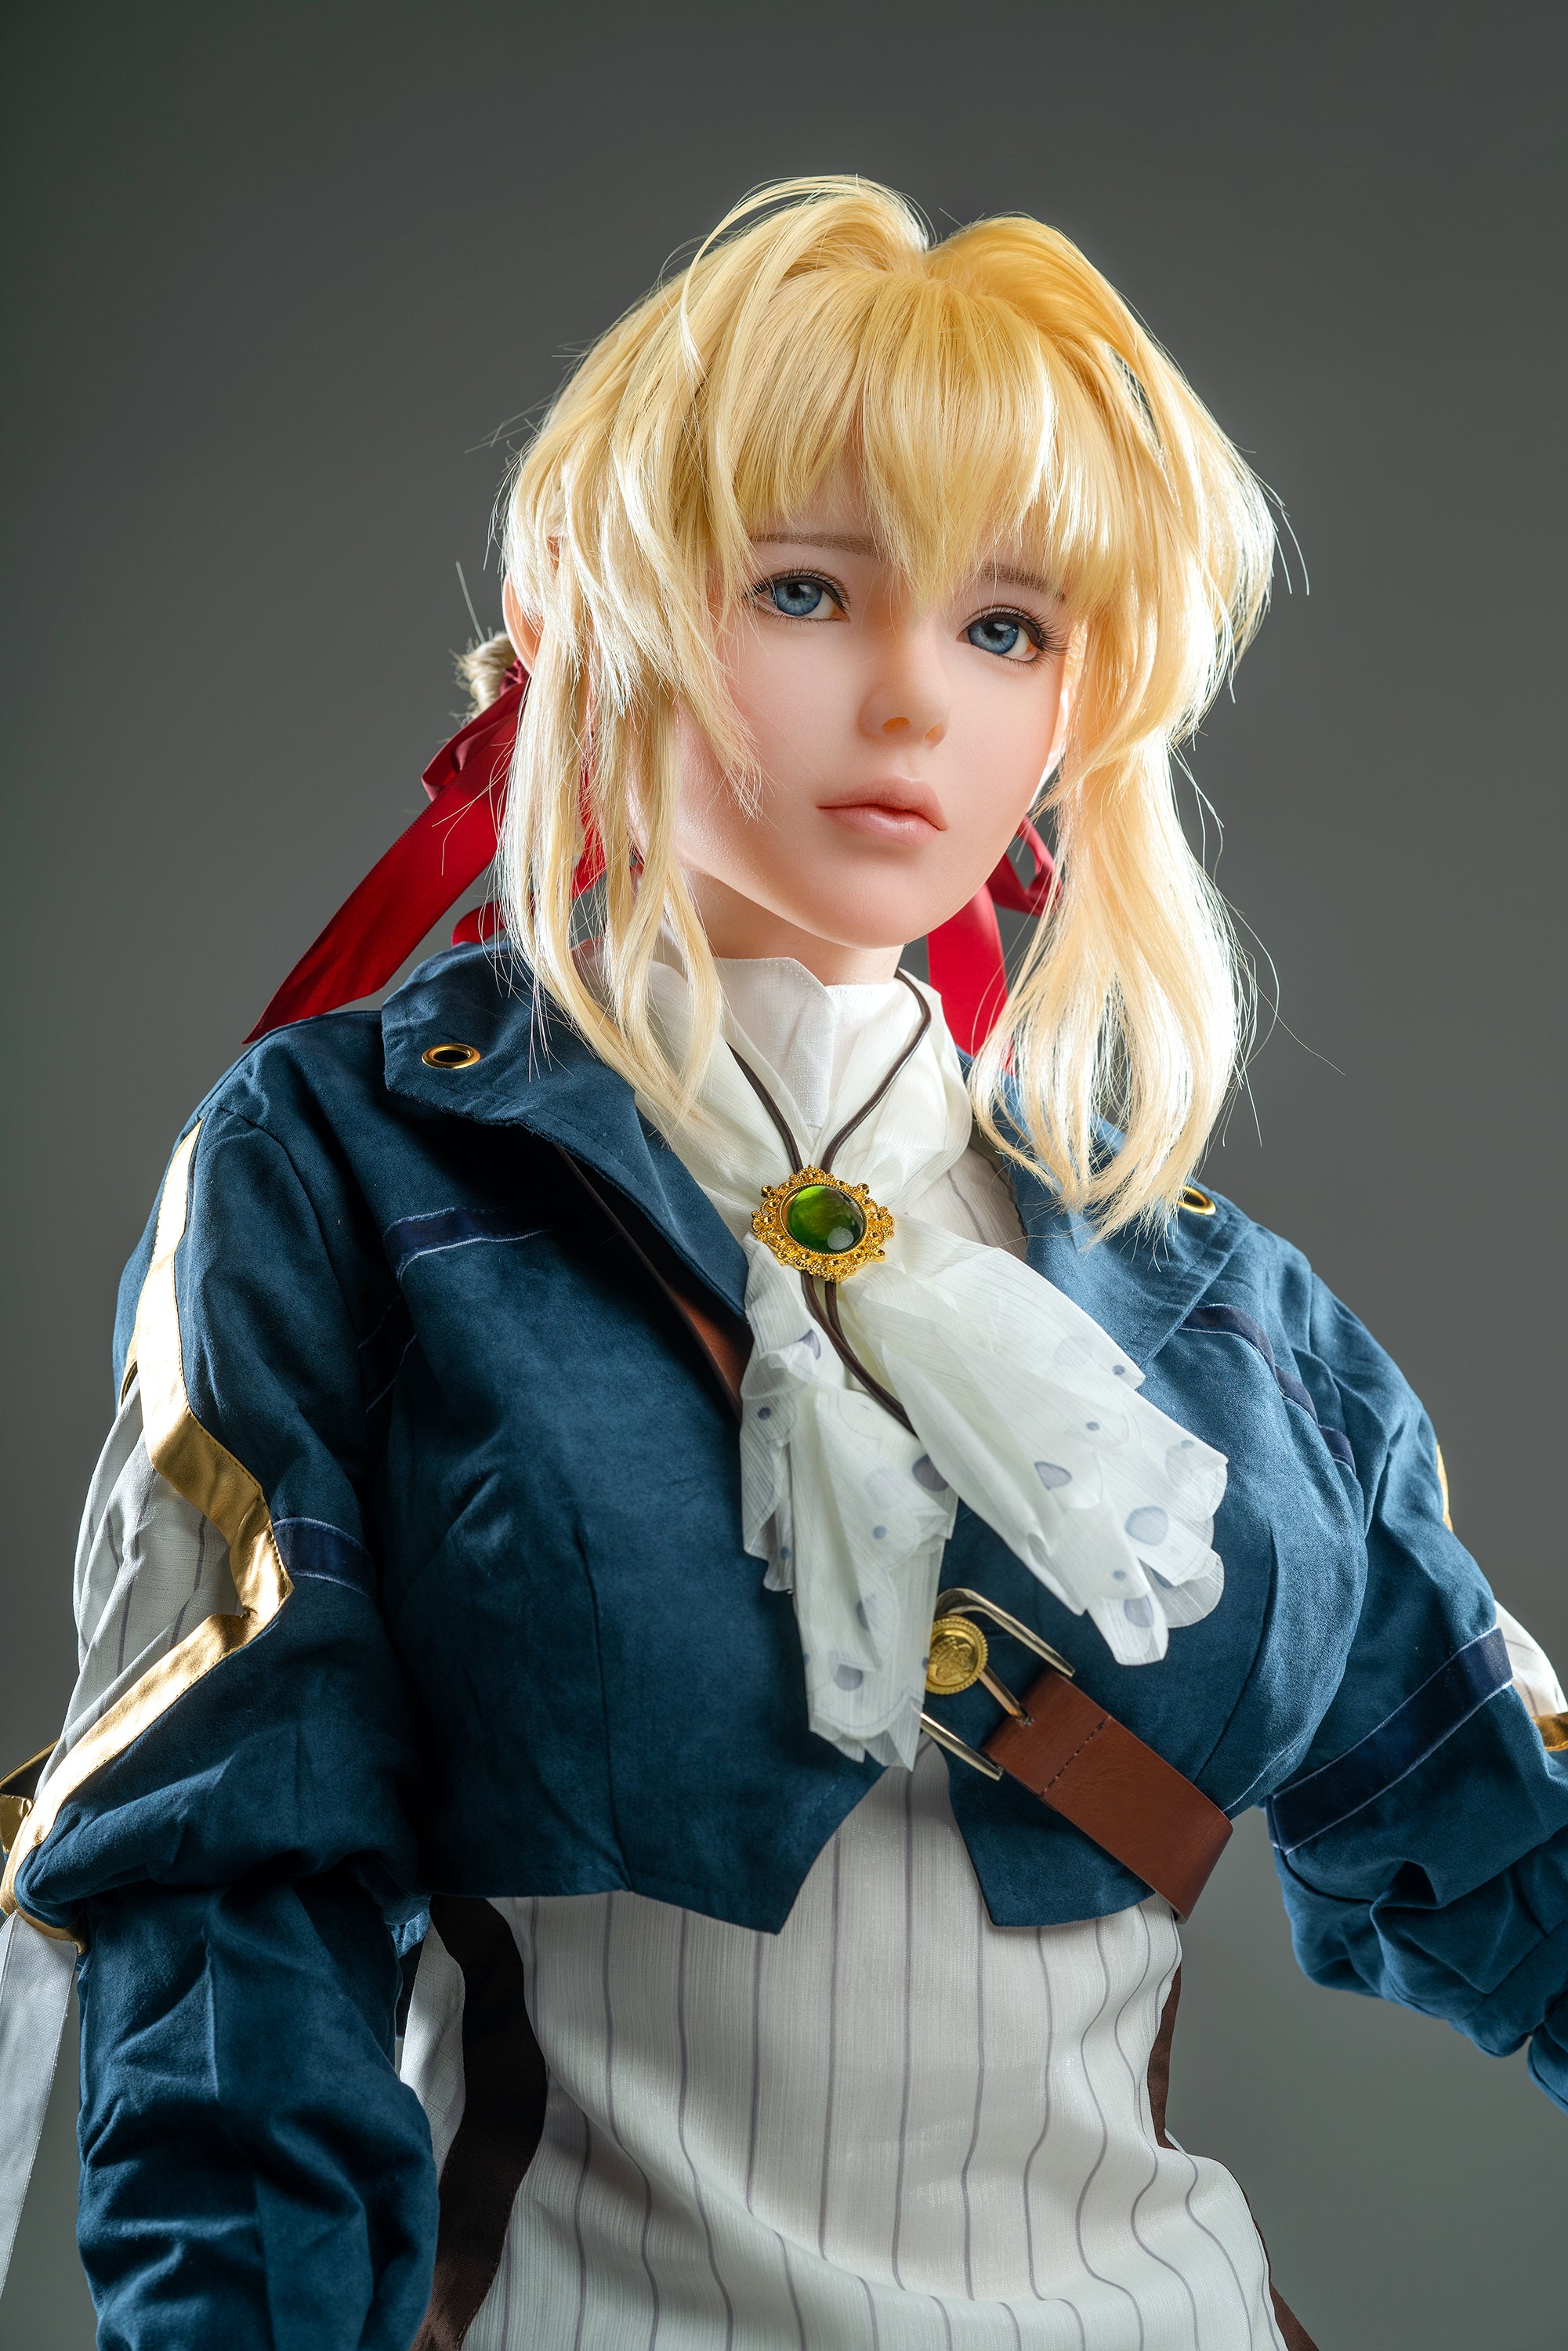 Game Lady 156 cm Silicone - Violet Evergarden | Buy Sex Dolls at DOLLS ACTUALLY